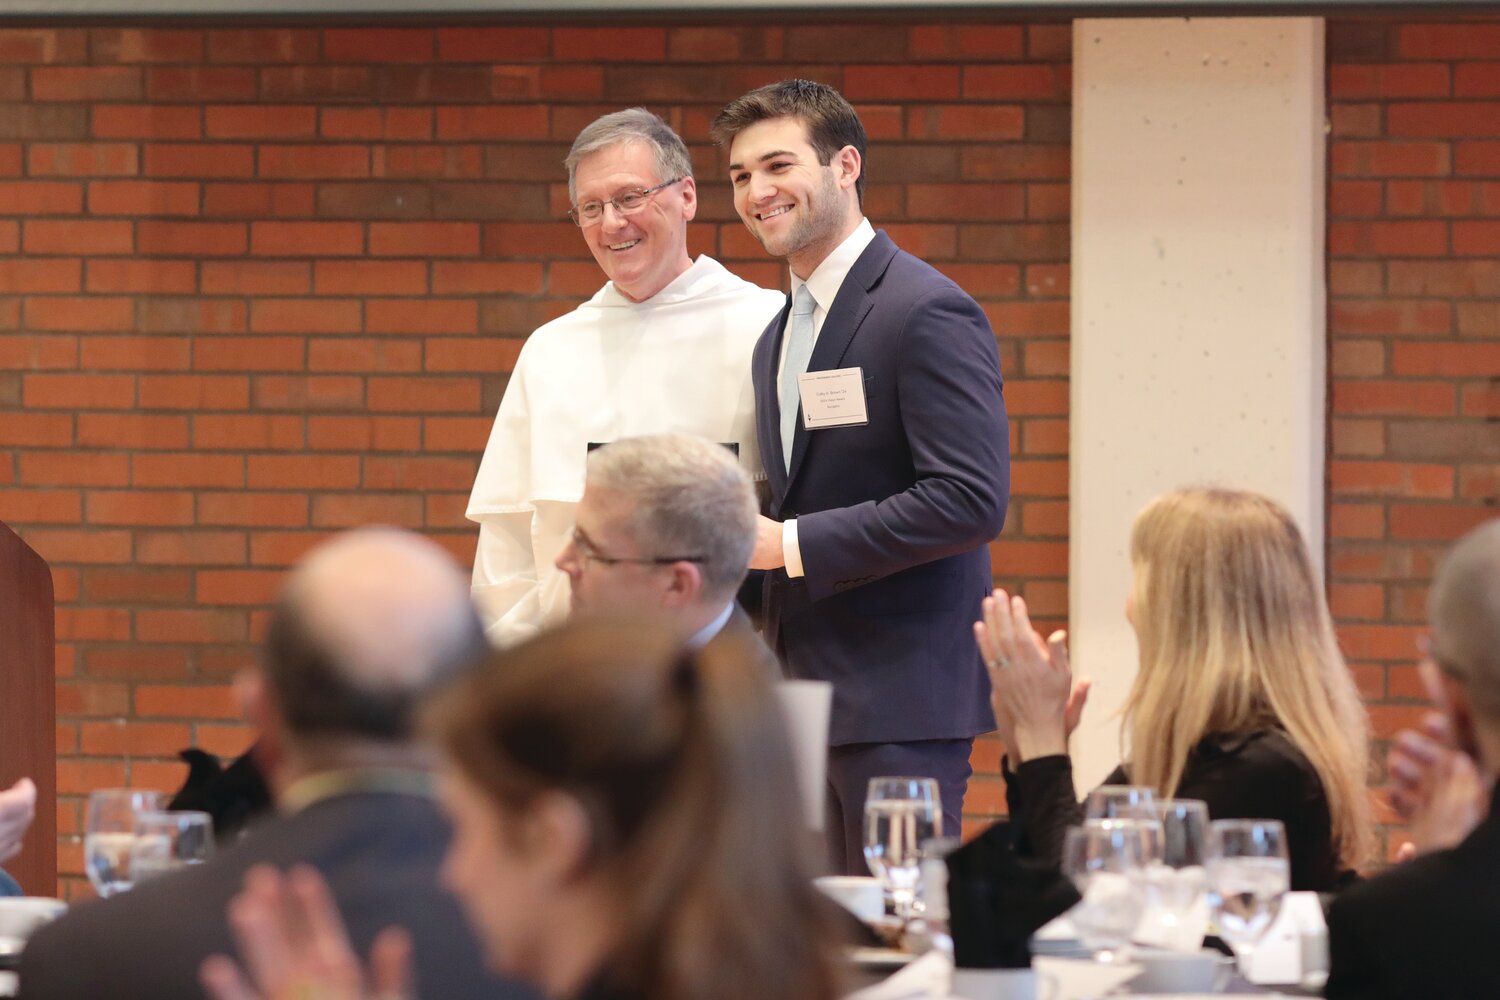 Providence College President Father Kenneth R. Sicard, O.P., presents Colby Brown, co-founder of the Rhode Island chapter of First Generation Investors, and Kerri Murray, President of ShelterBox USA, with their Dr. Martin Luther King, Jr. Vision Awards.